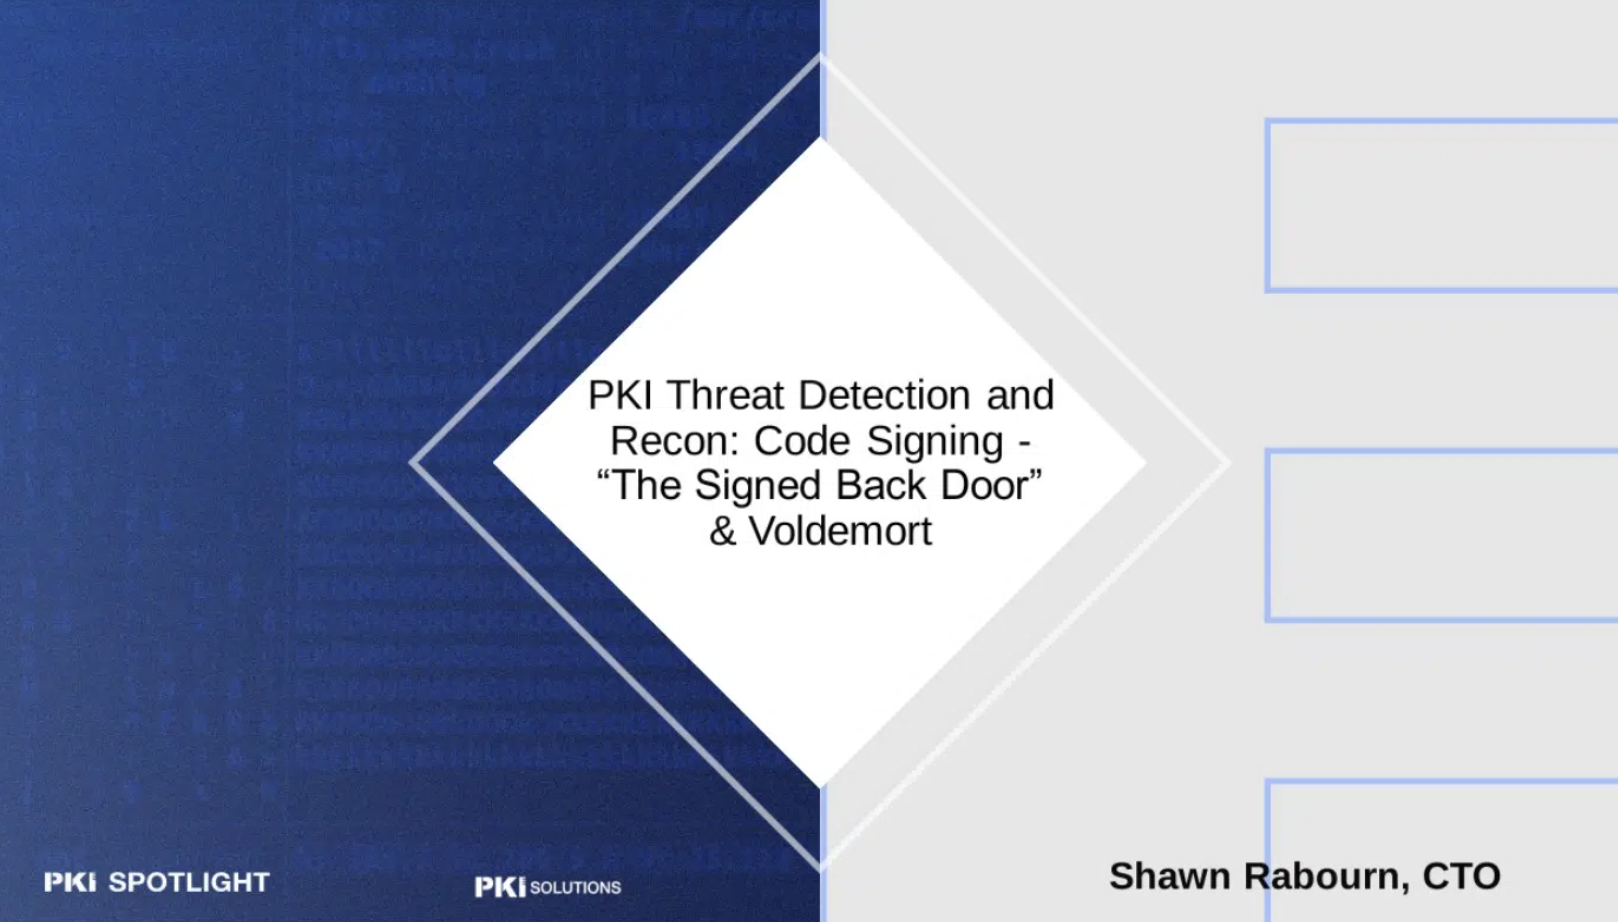 PKI Threat Detection and Recon: Code Signing – “The Signed Back Door” Webinar